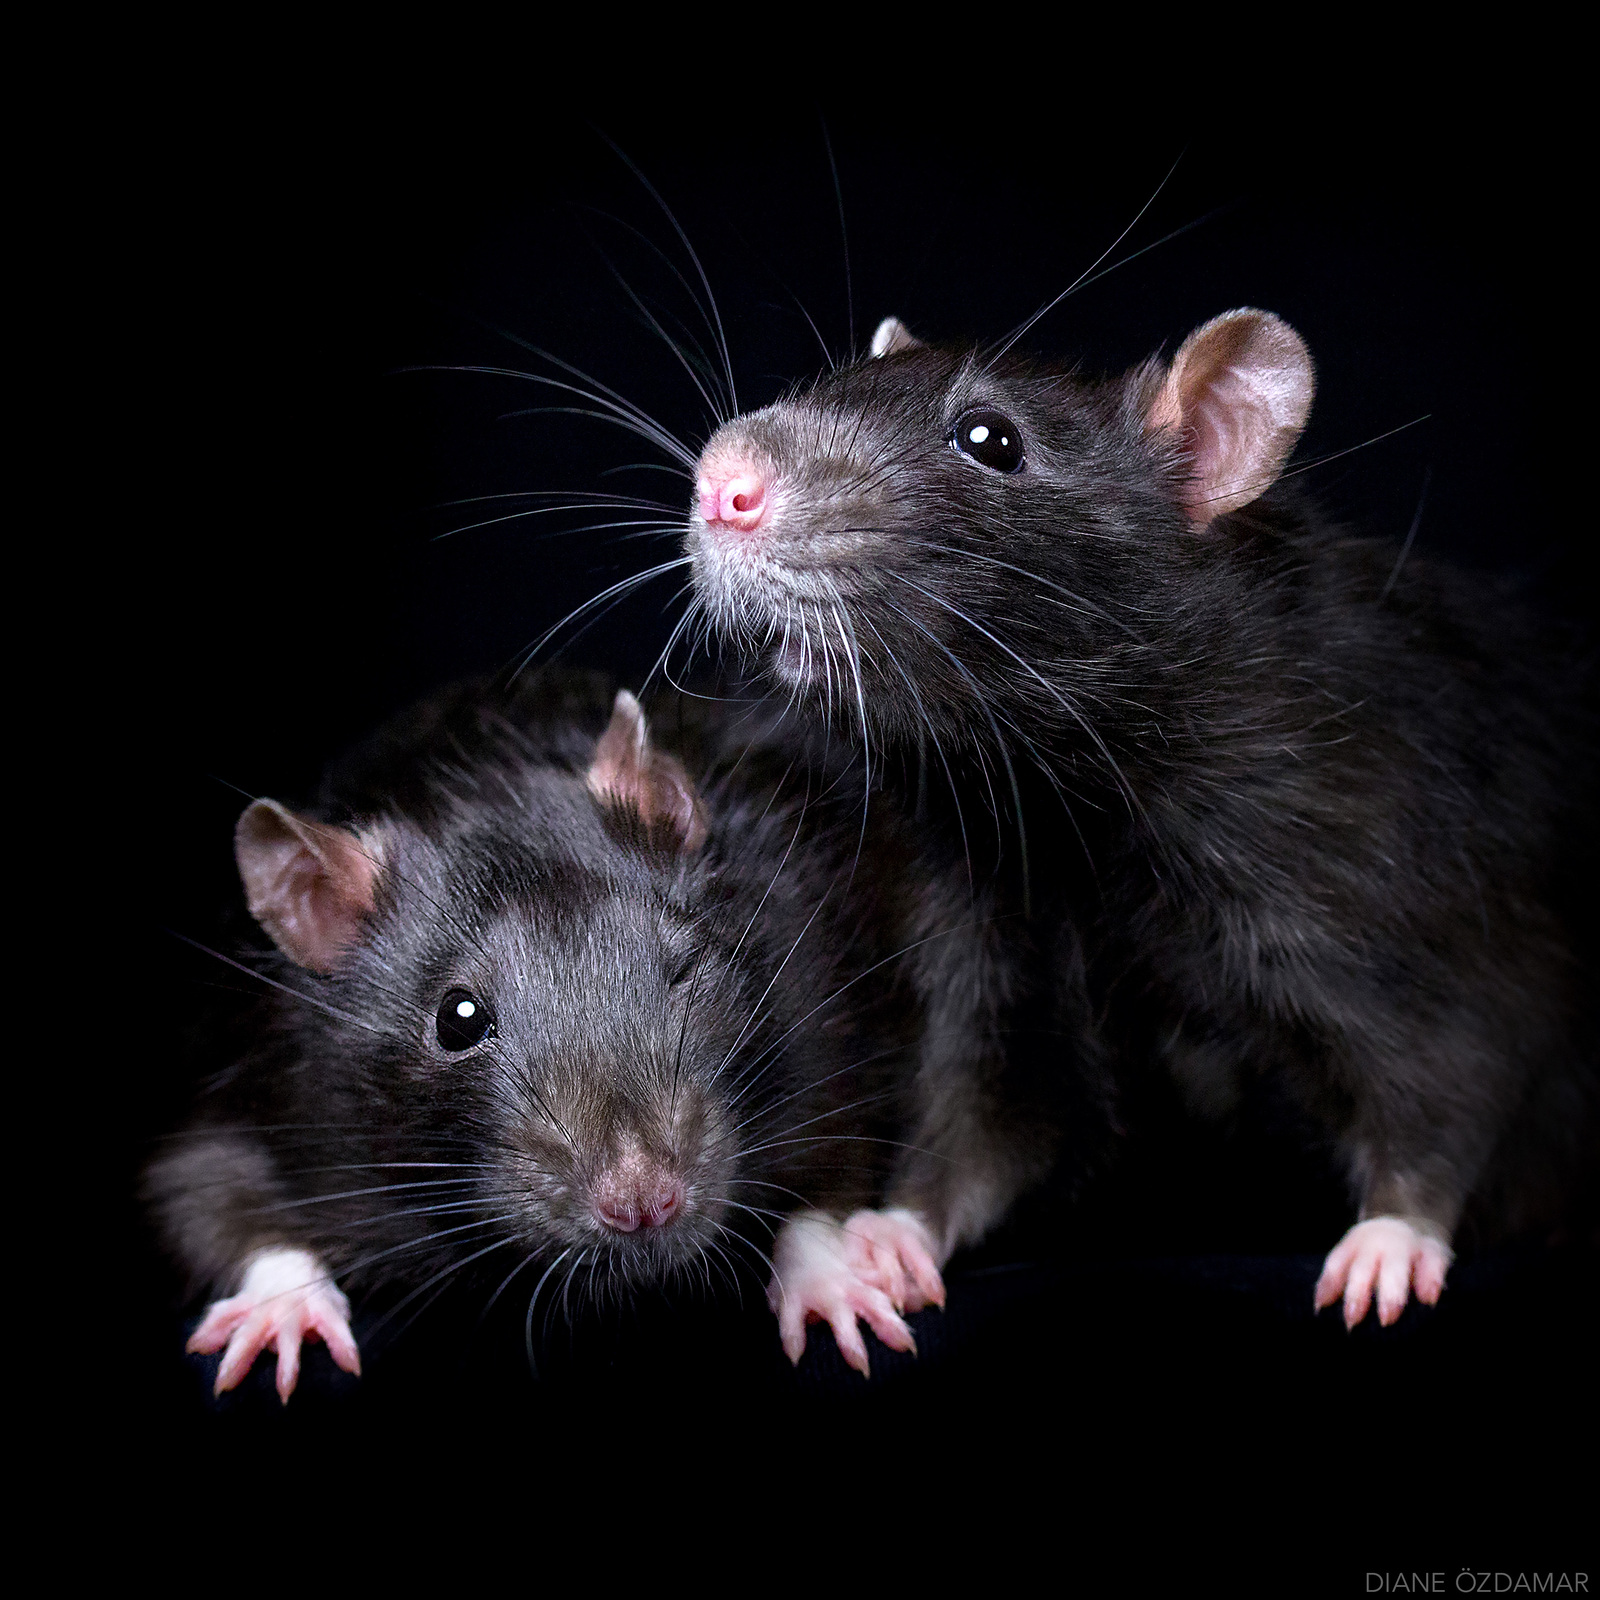 The Canadian showed rats from an unexpected angle - these are cute creatures! - Decorative rats, Opening, Rat, Rat Chronicles, Rat King, , The photo, Photographer